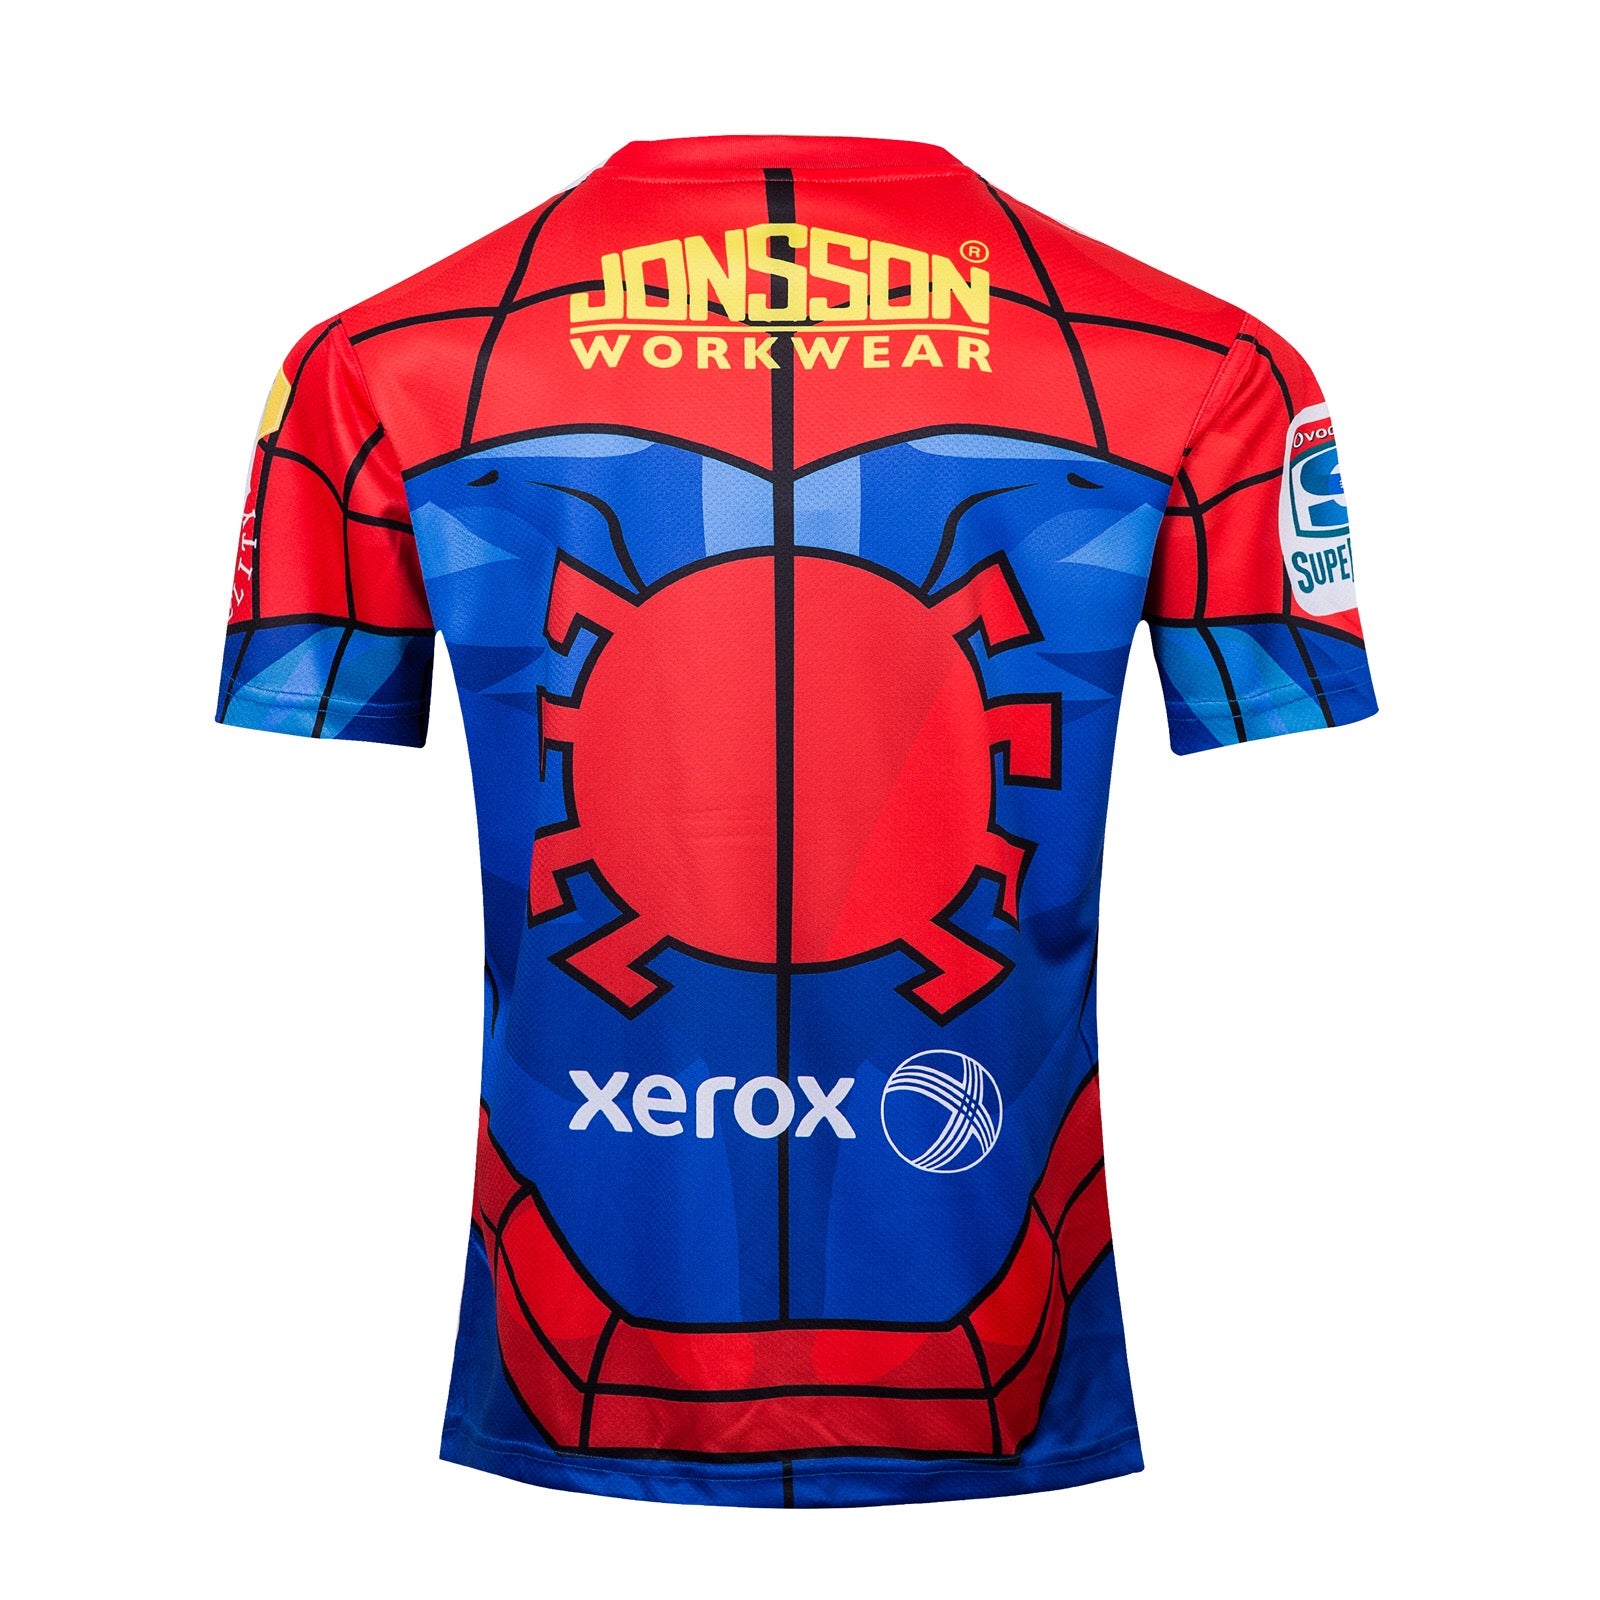 spiderman rugby jersey